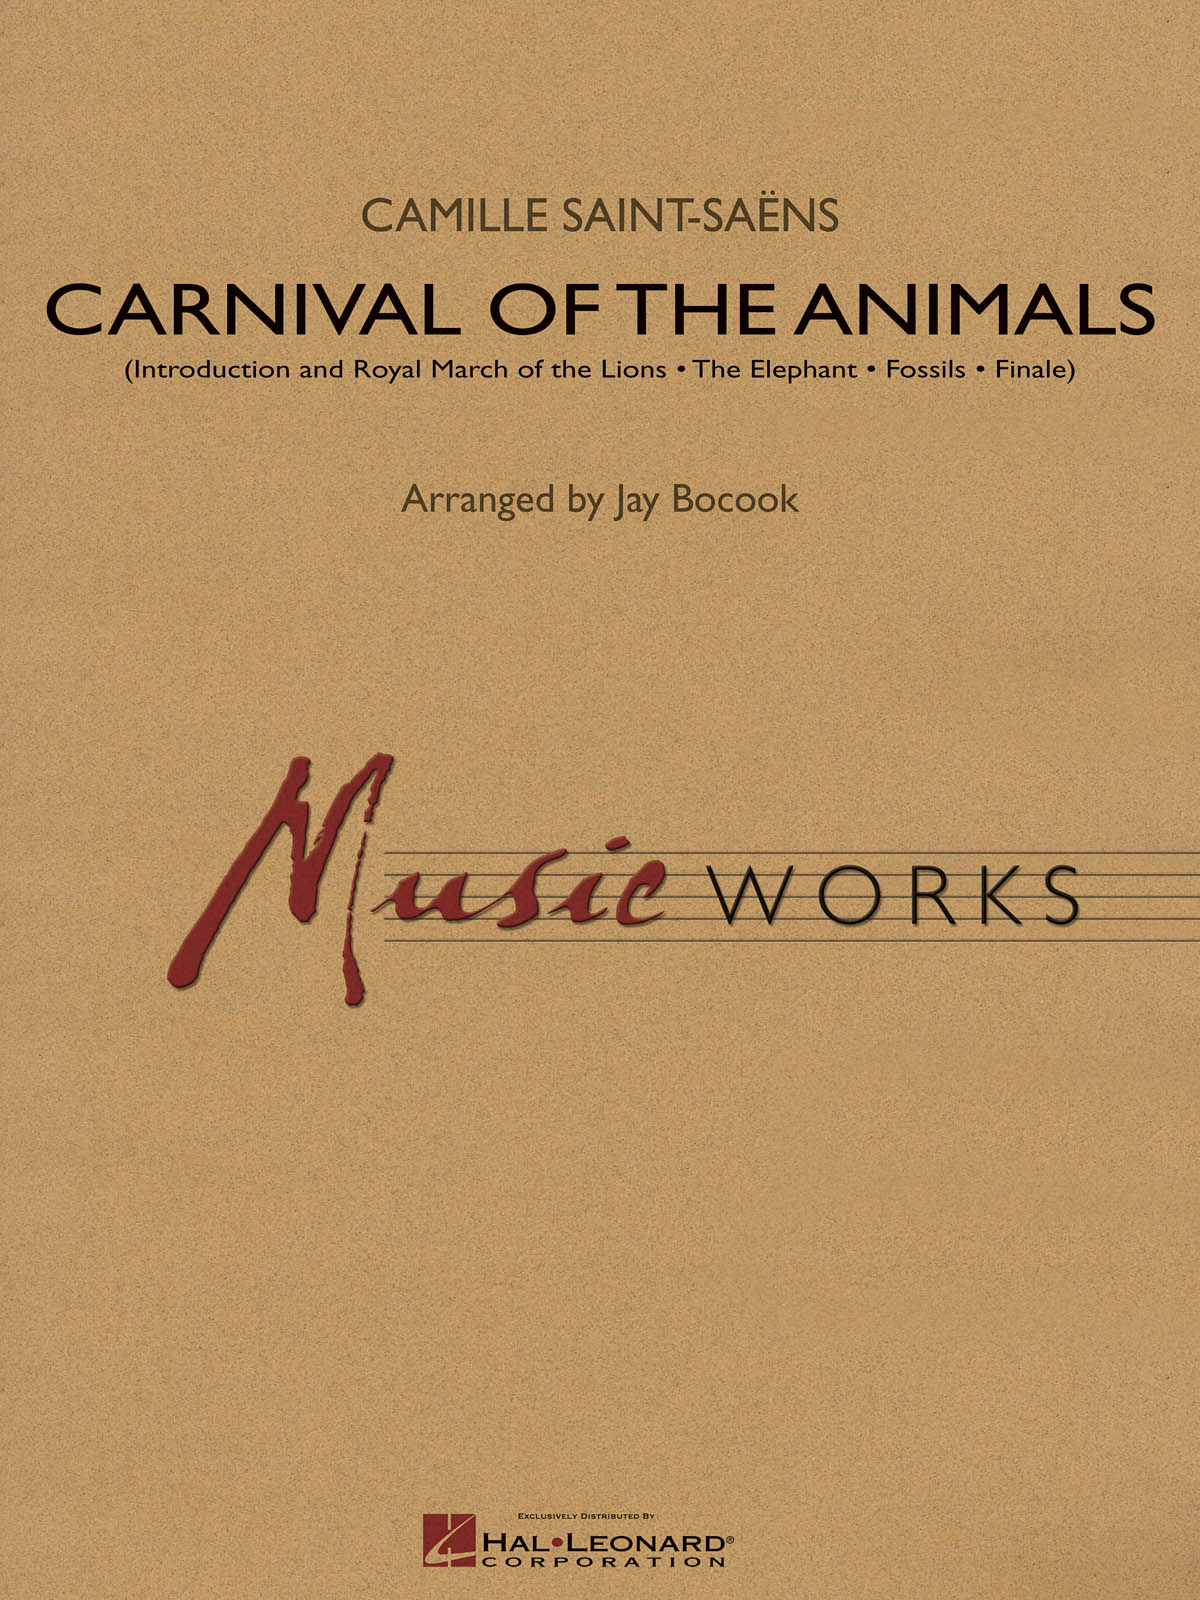 Camille Saint-Saëns: Carnival of the animals: Concert Band: Score